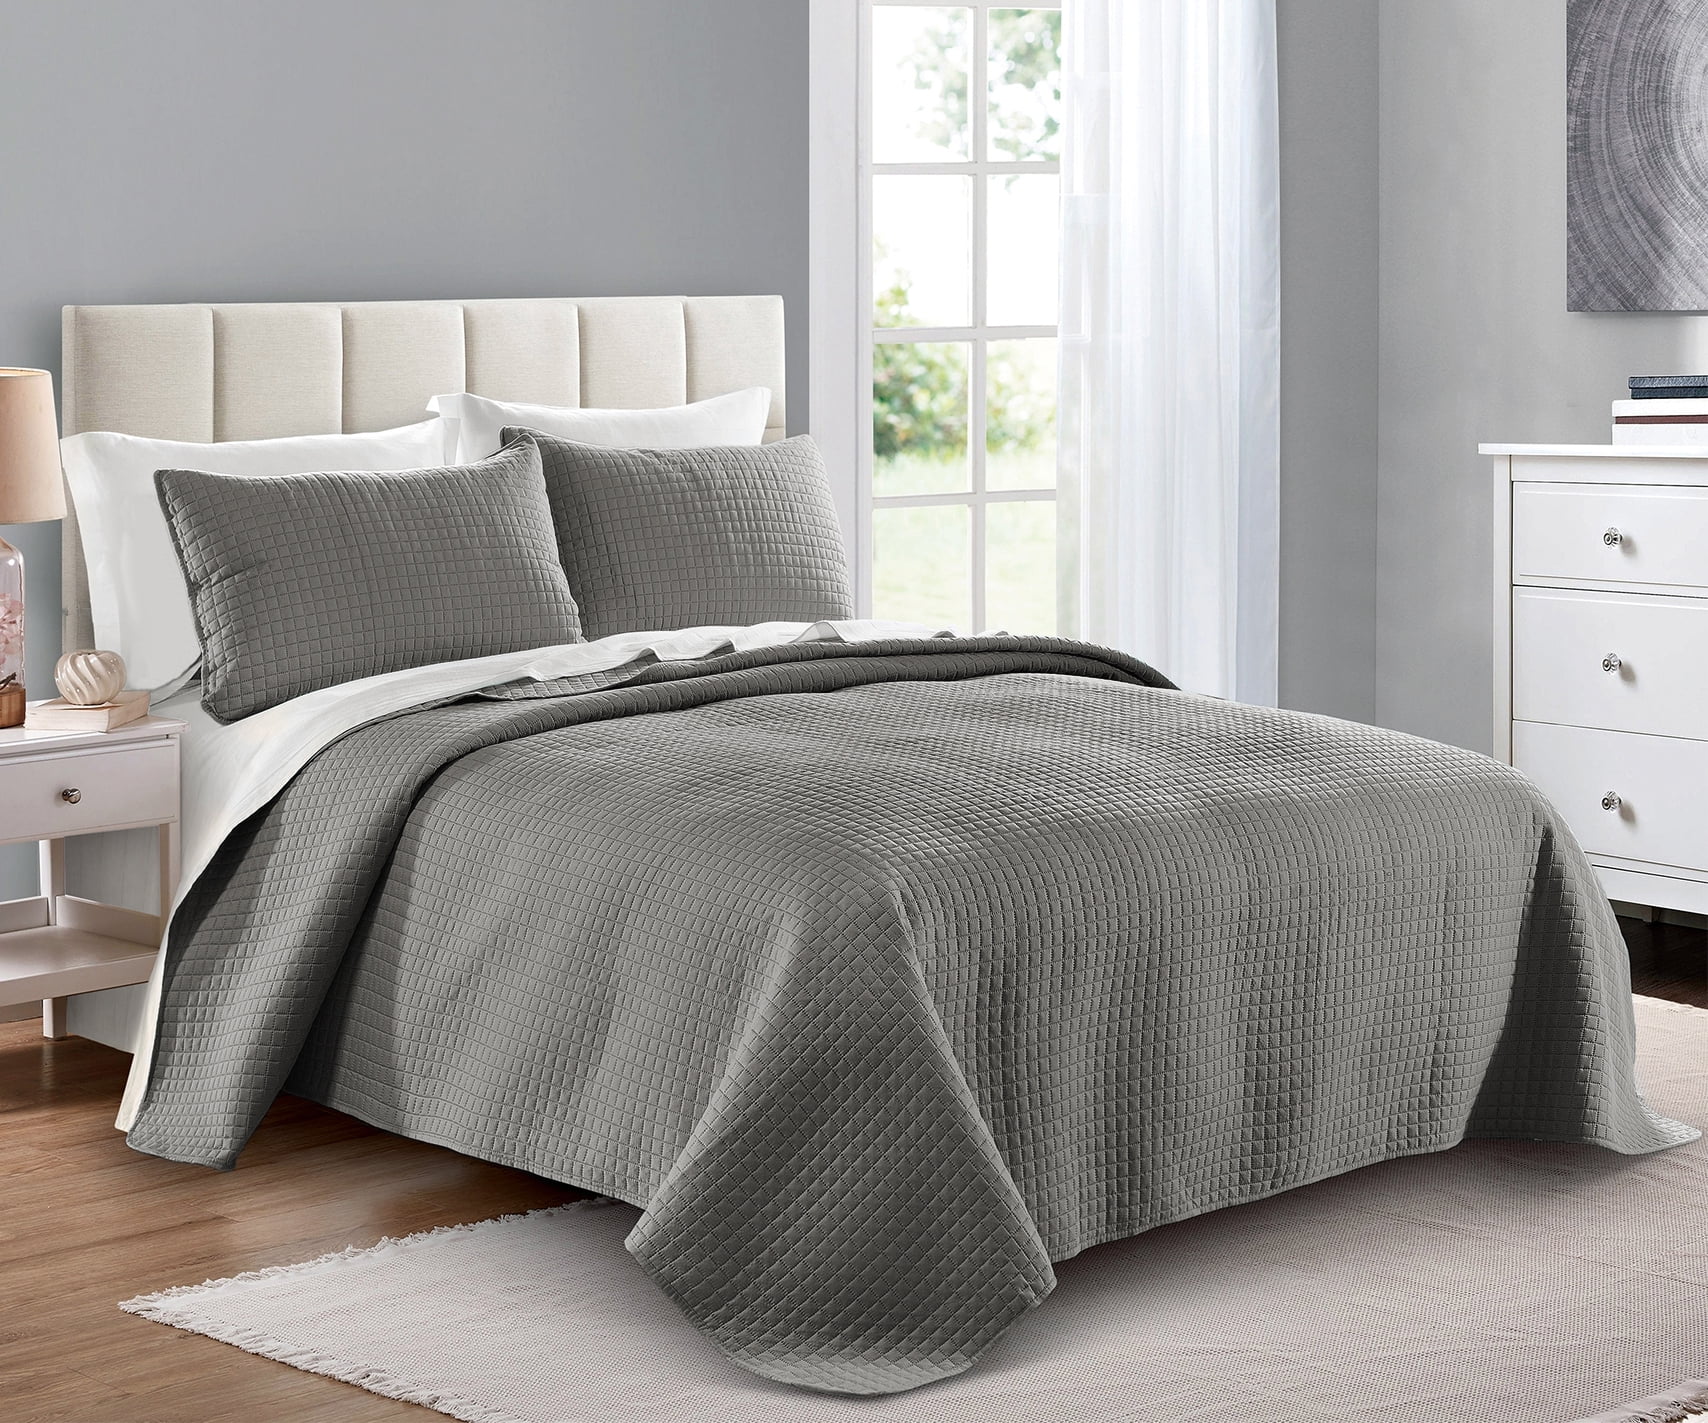 1031 King/Cal King, Gray Comfy Bedding Extra Lightweight and Oversized Thermal Pressing Floral 3-piece Coverlet Set 